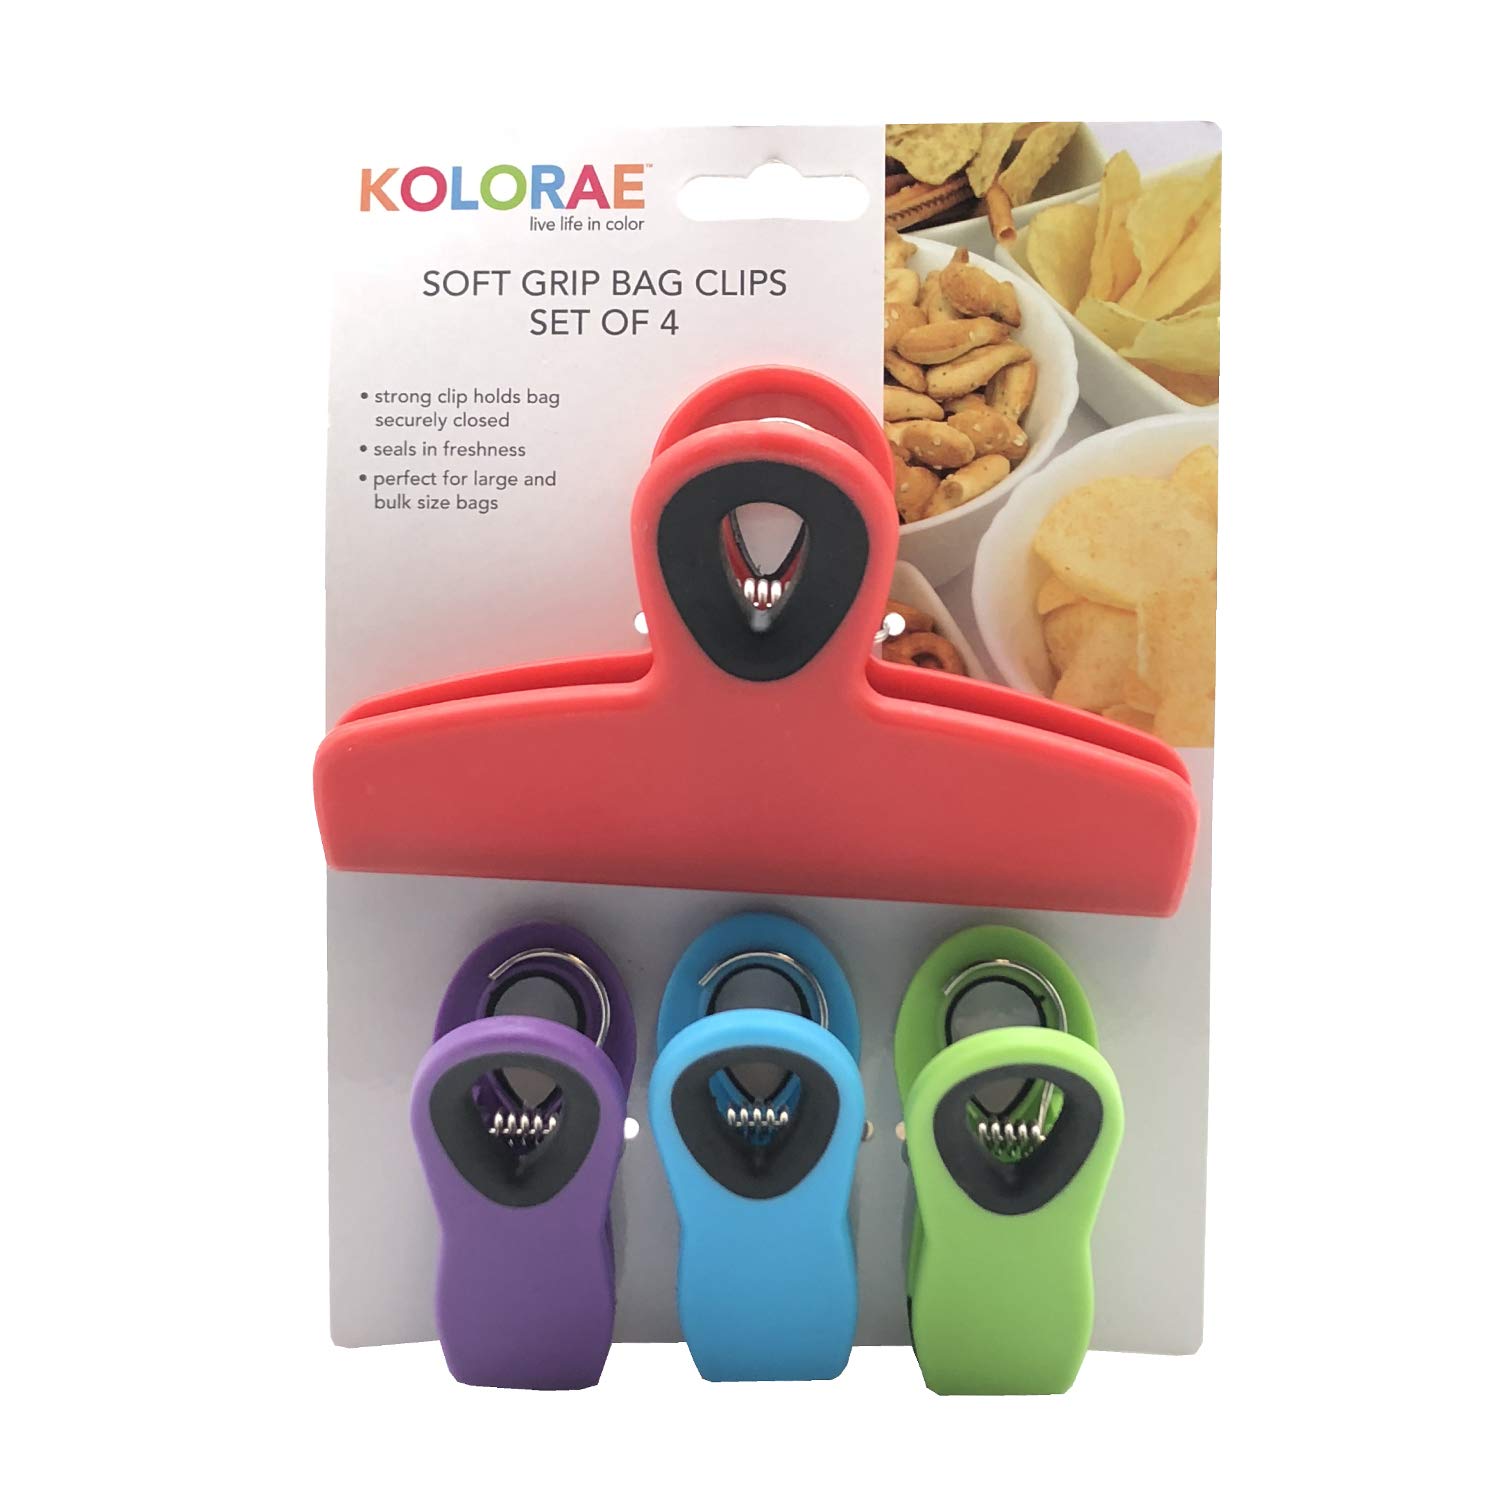 KOLORAE SOFT GRIP BAG CLIPS - MULTI-COLORED Chip Bag Clips, Kitchen Clips, Magnetic Chip Clips for Bags, Food Bag Clips with Airtight Seal - AVAILABLE IN A SET OF 4 OR 12 BAG CLIPS! (12)